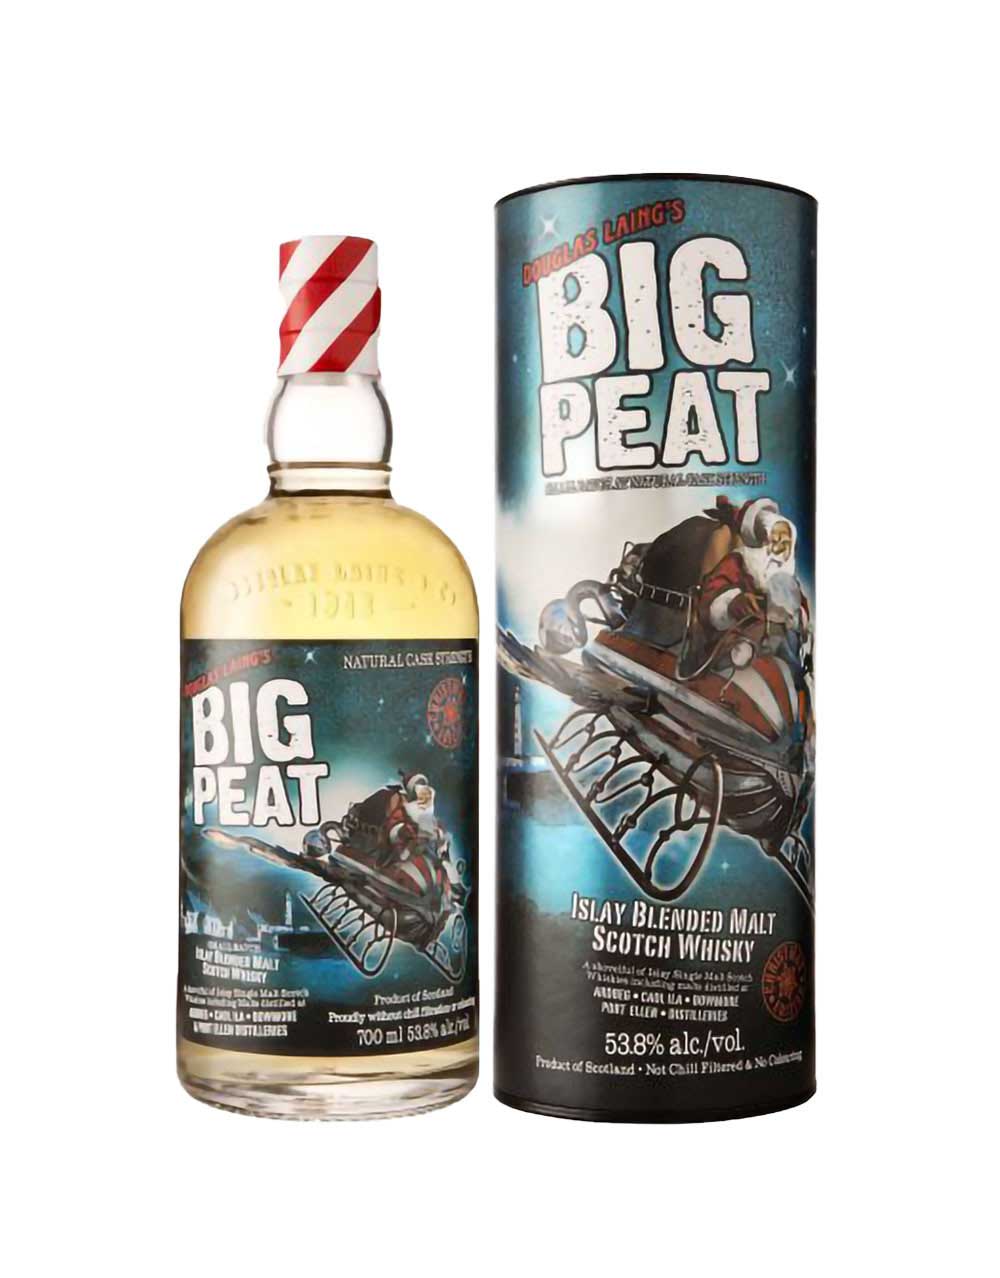 The Big Peat Scotch Whisky Christmas Edition